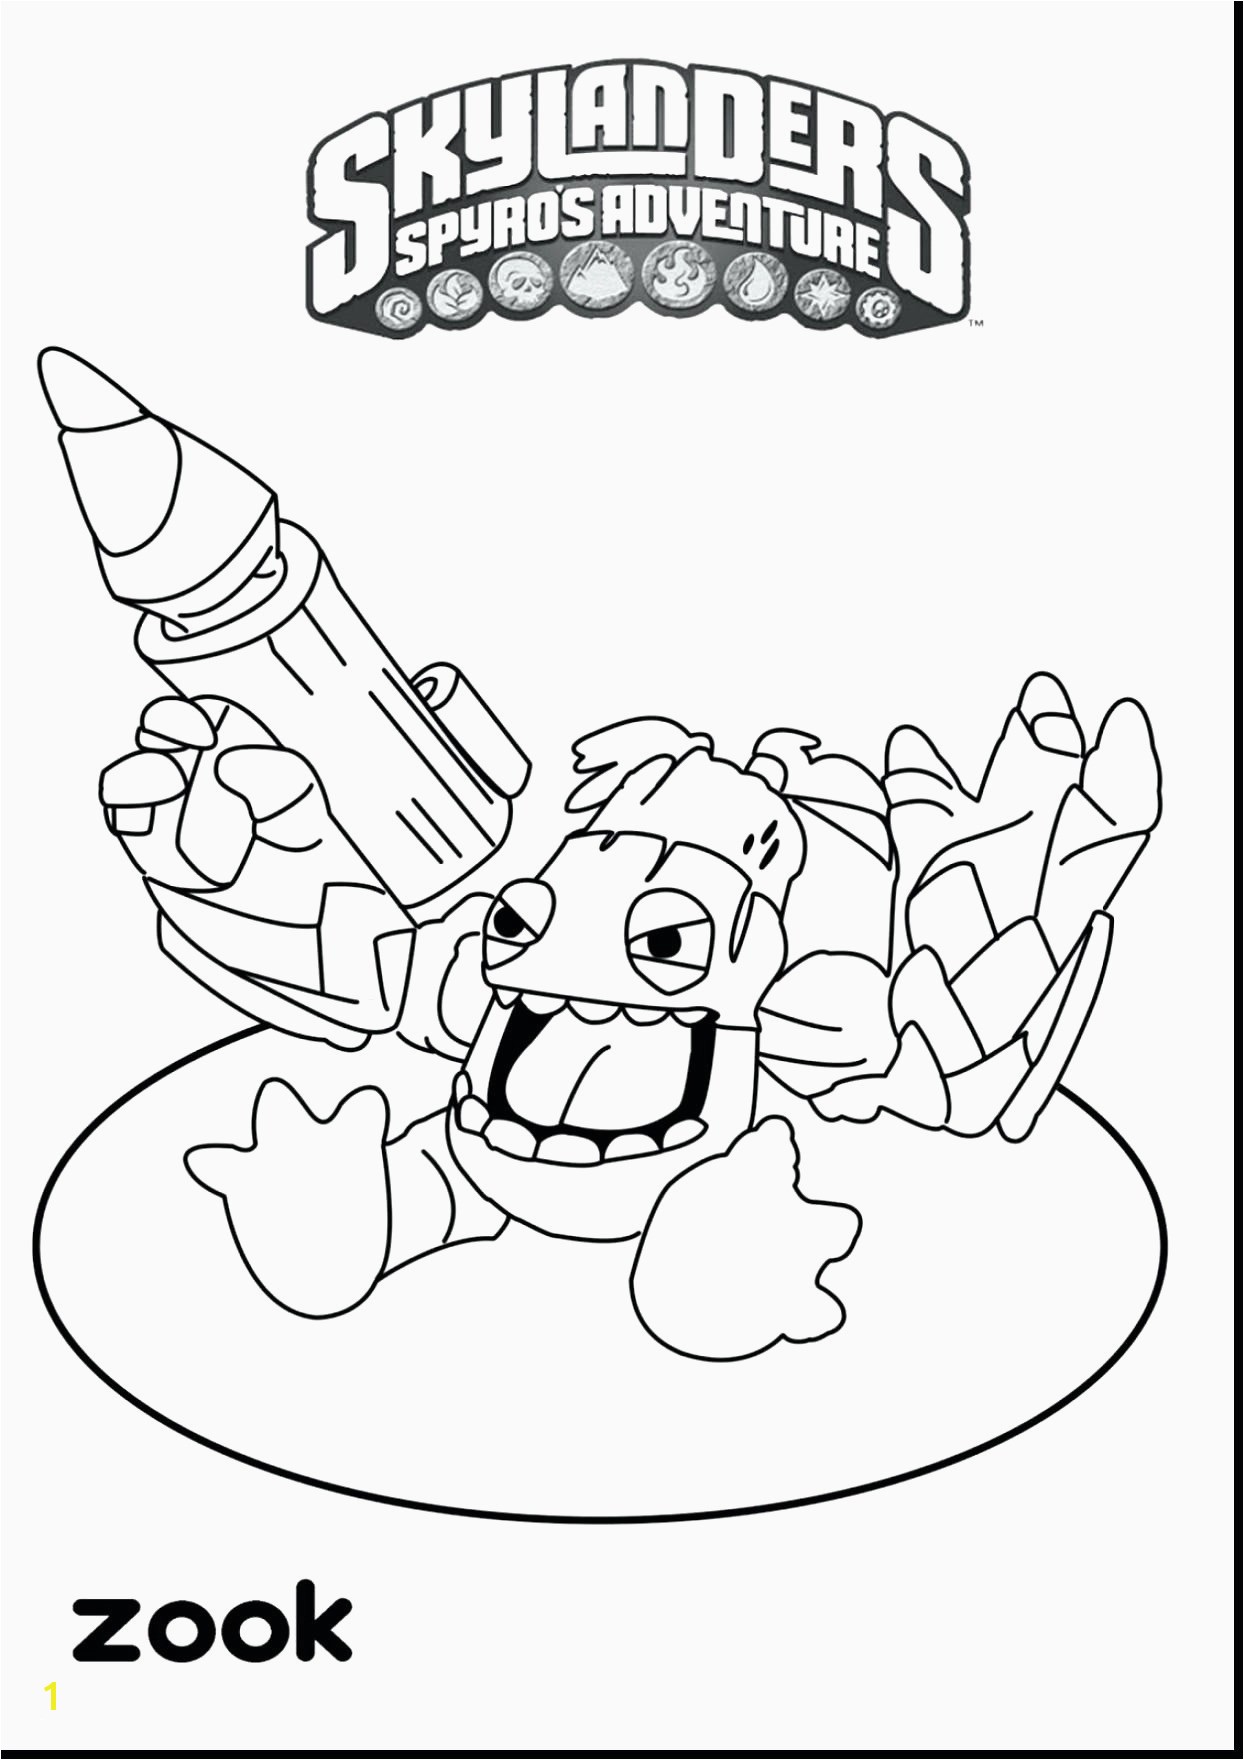 Free Frog Coloring Pages Inspirational Brain Coloring Page Heathermarxgallery Free Frog Coloring Pages Beautiful Frog